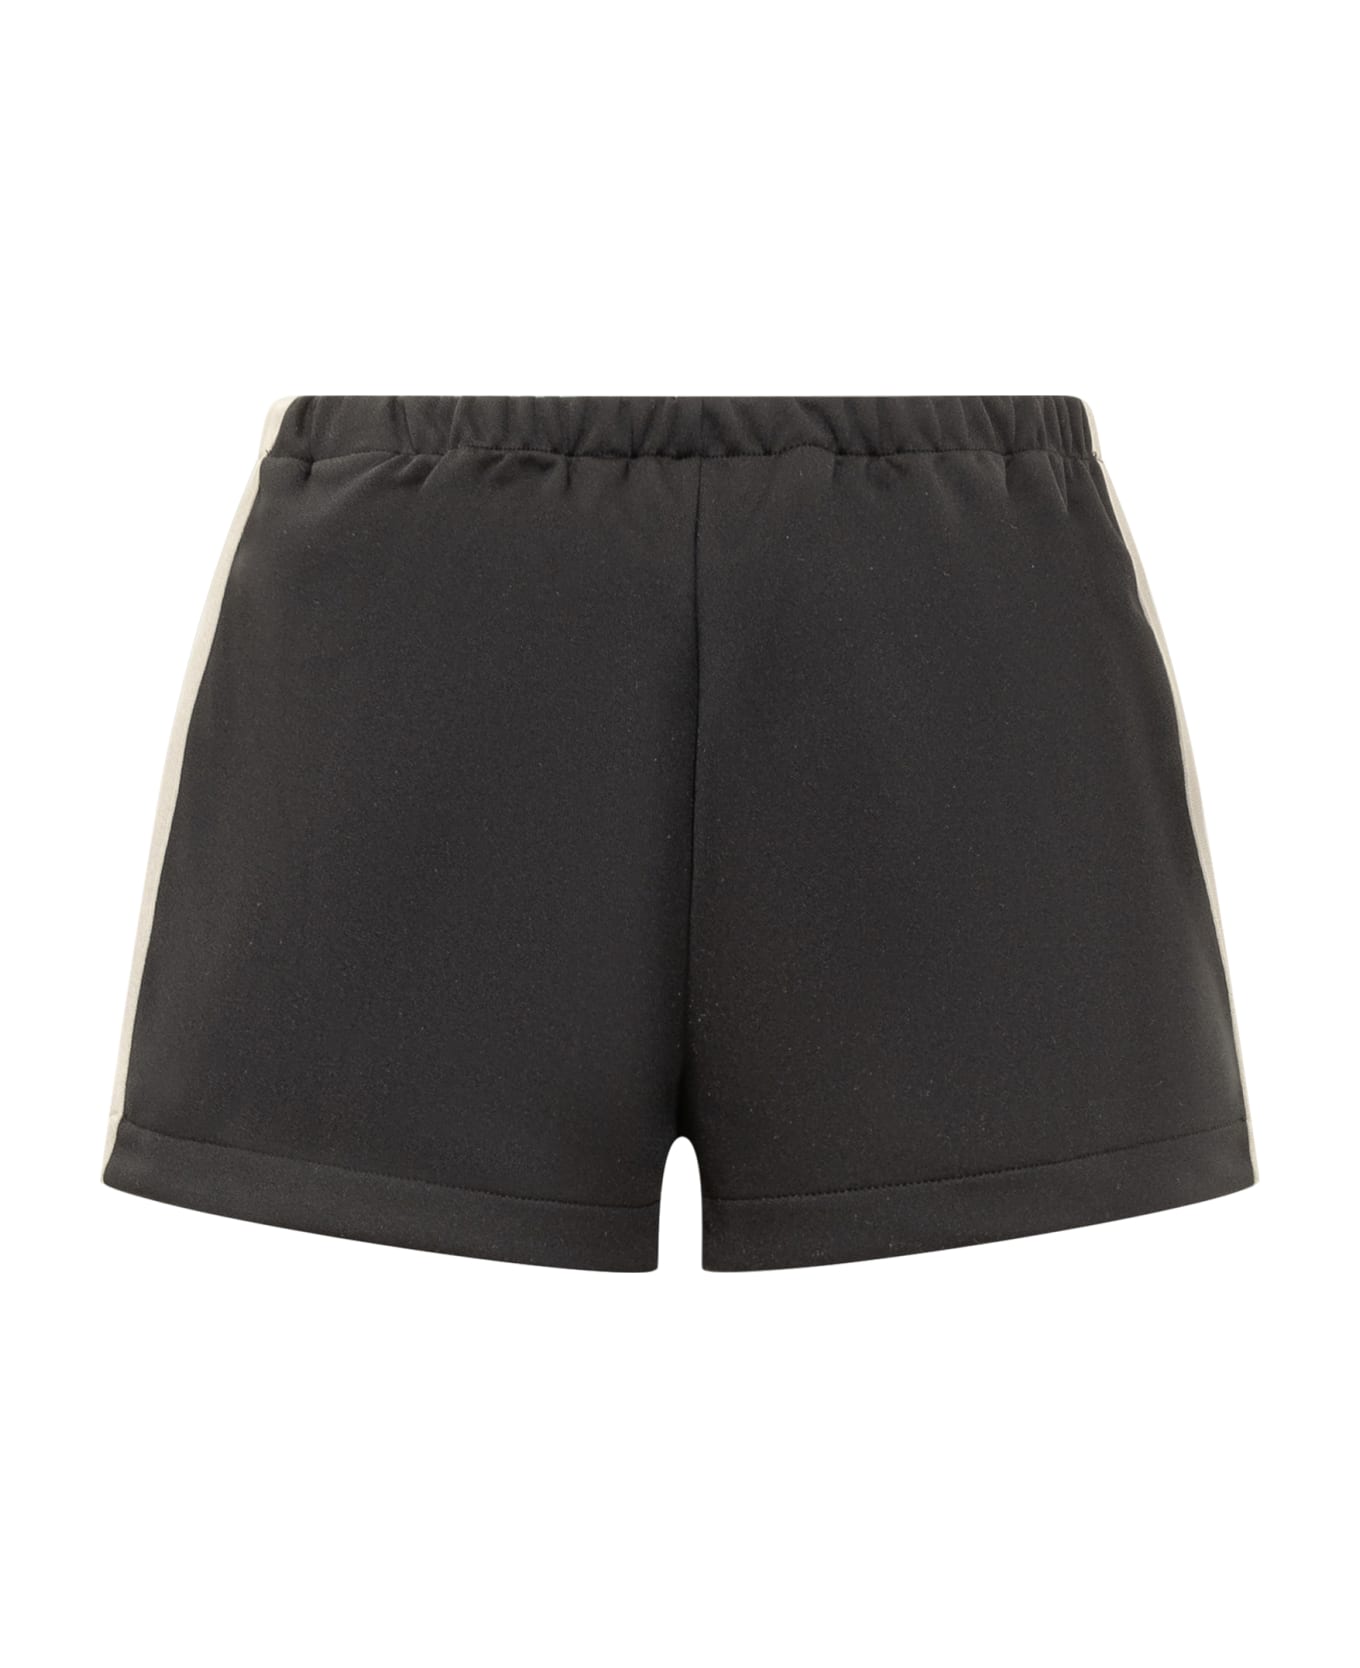 Palm Angels Black Polyester Sporty Shorts - BLACK OFF WHITE